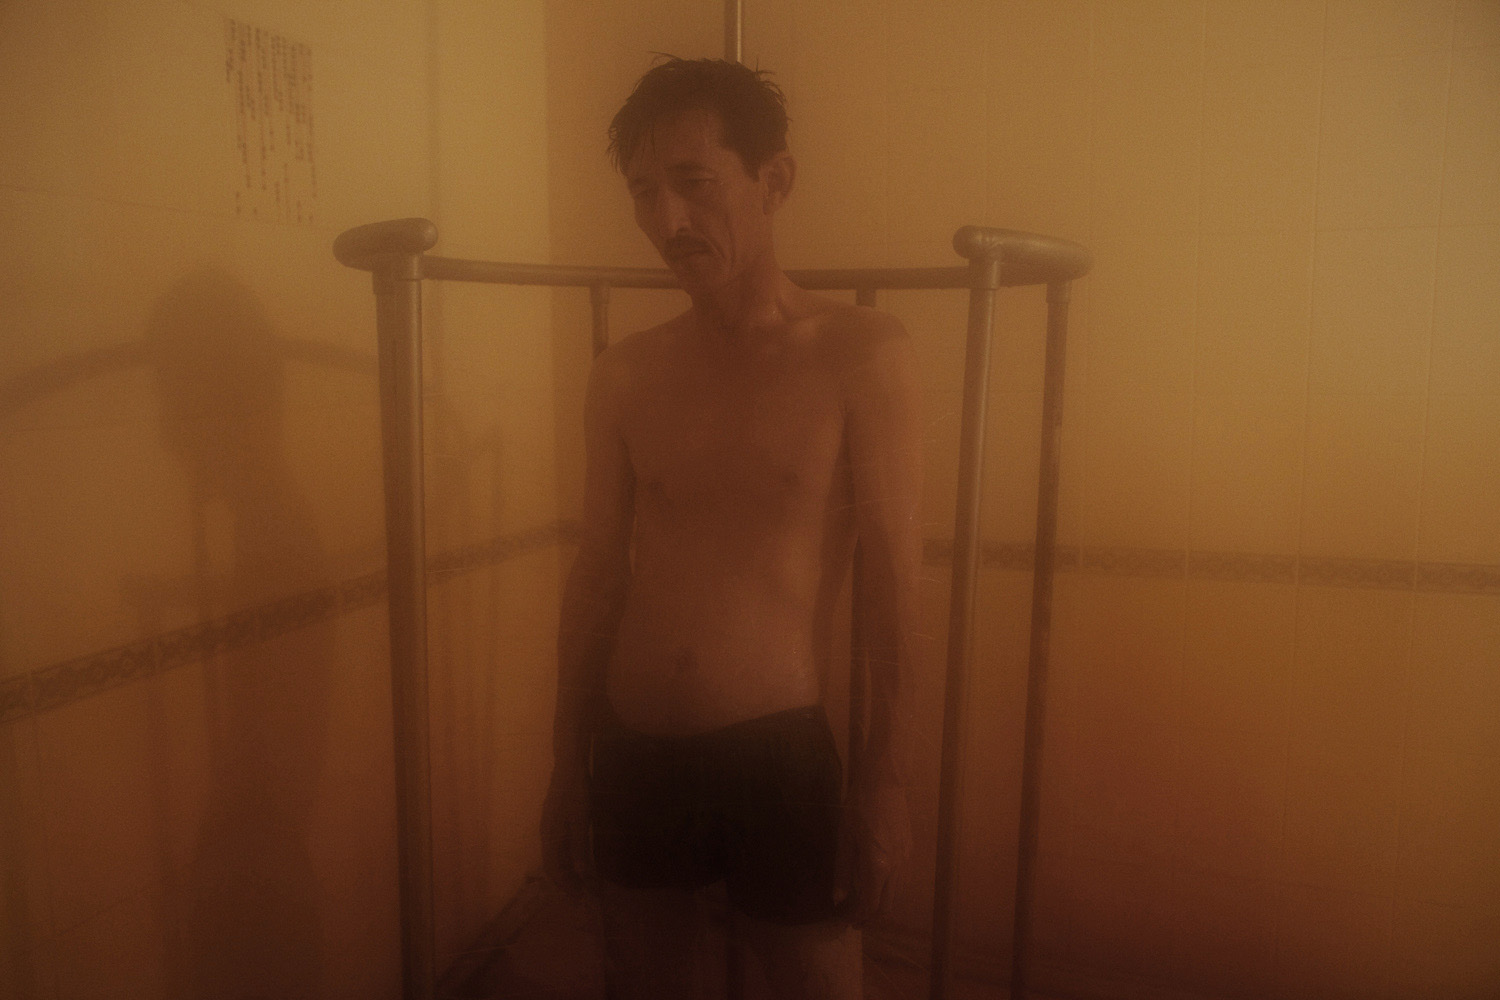 A man from Almaty stands in a shower which sprays water from all sides. It is one of several treatments that patients go through during the course of a day at a spa called Zhetisay Sanatorium in the town of Mineral Water.